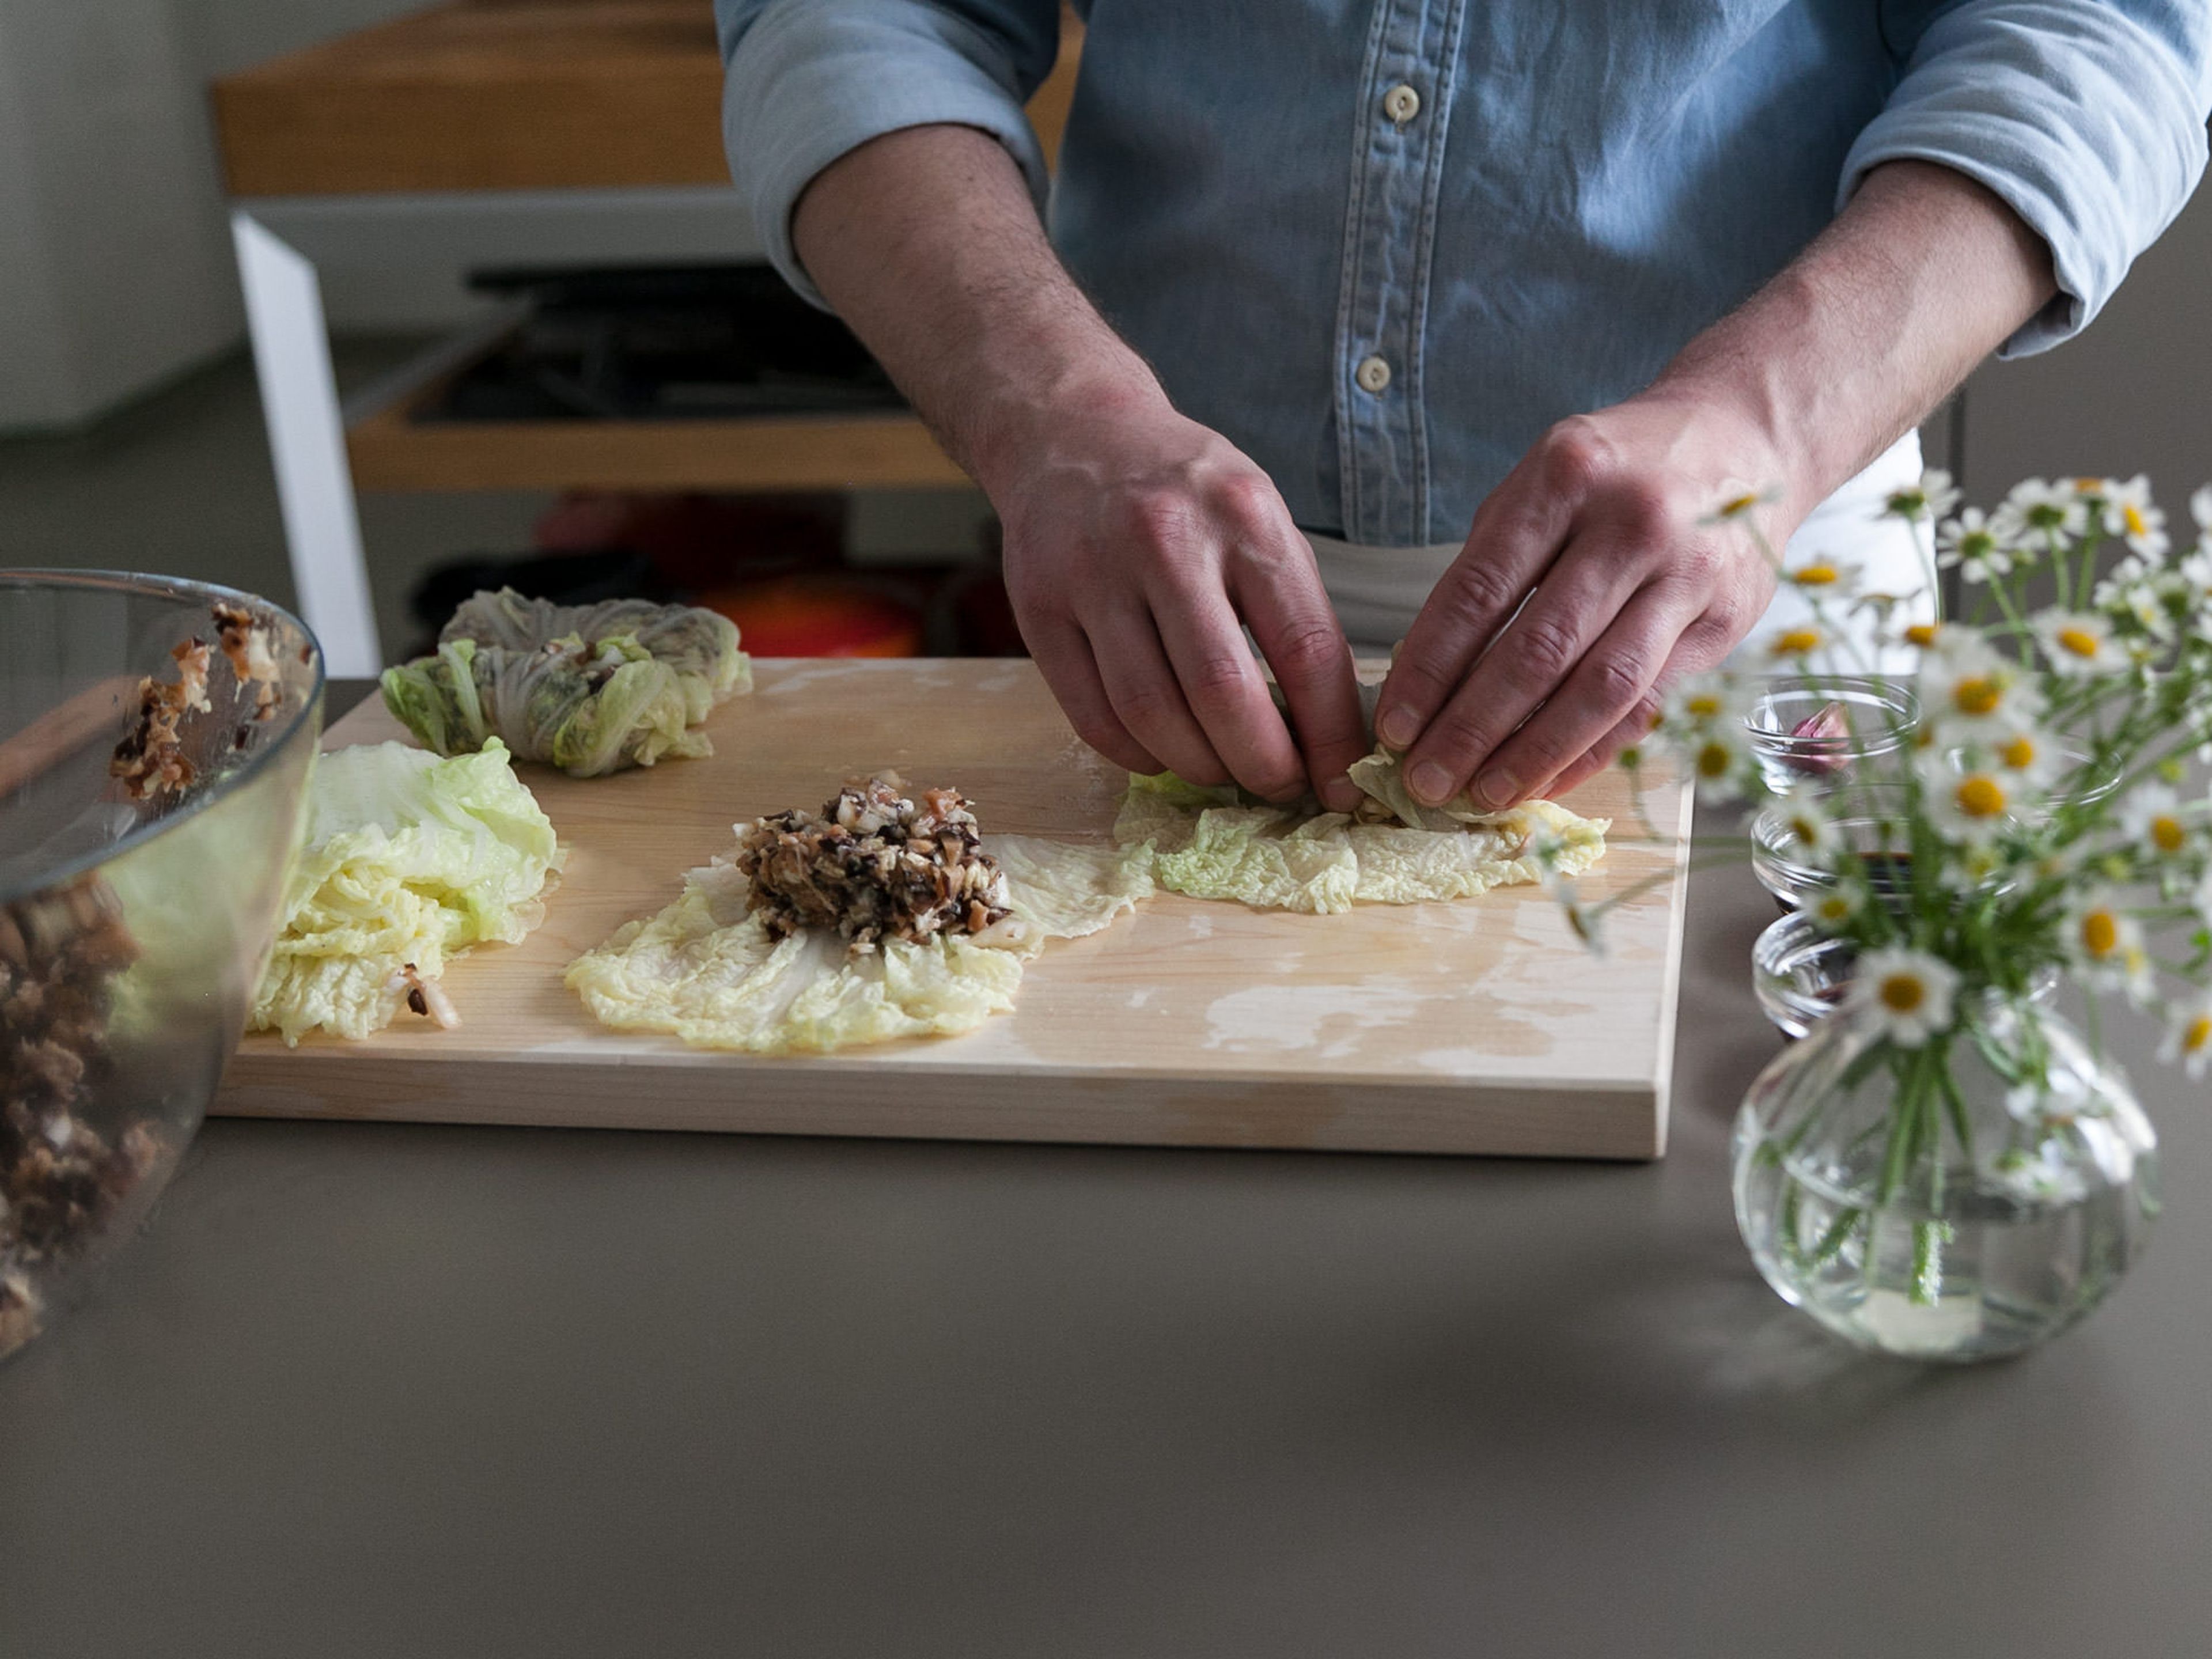 Smooth blanched cabbage leaves onto a clean work surface and place two spoons of filling on each leaf. Roll from the bottom up, folding in both sides in order to seal in the filling. If desired, fix with toothpicks. Repeat until all filling is used up.